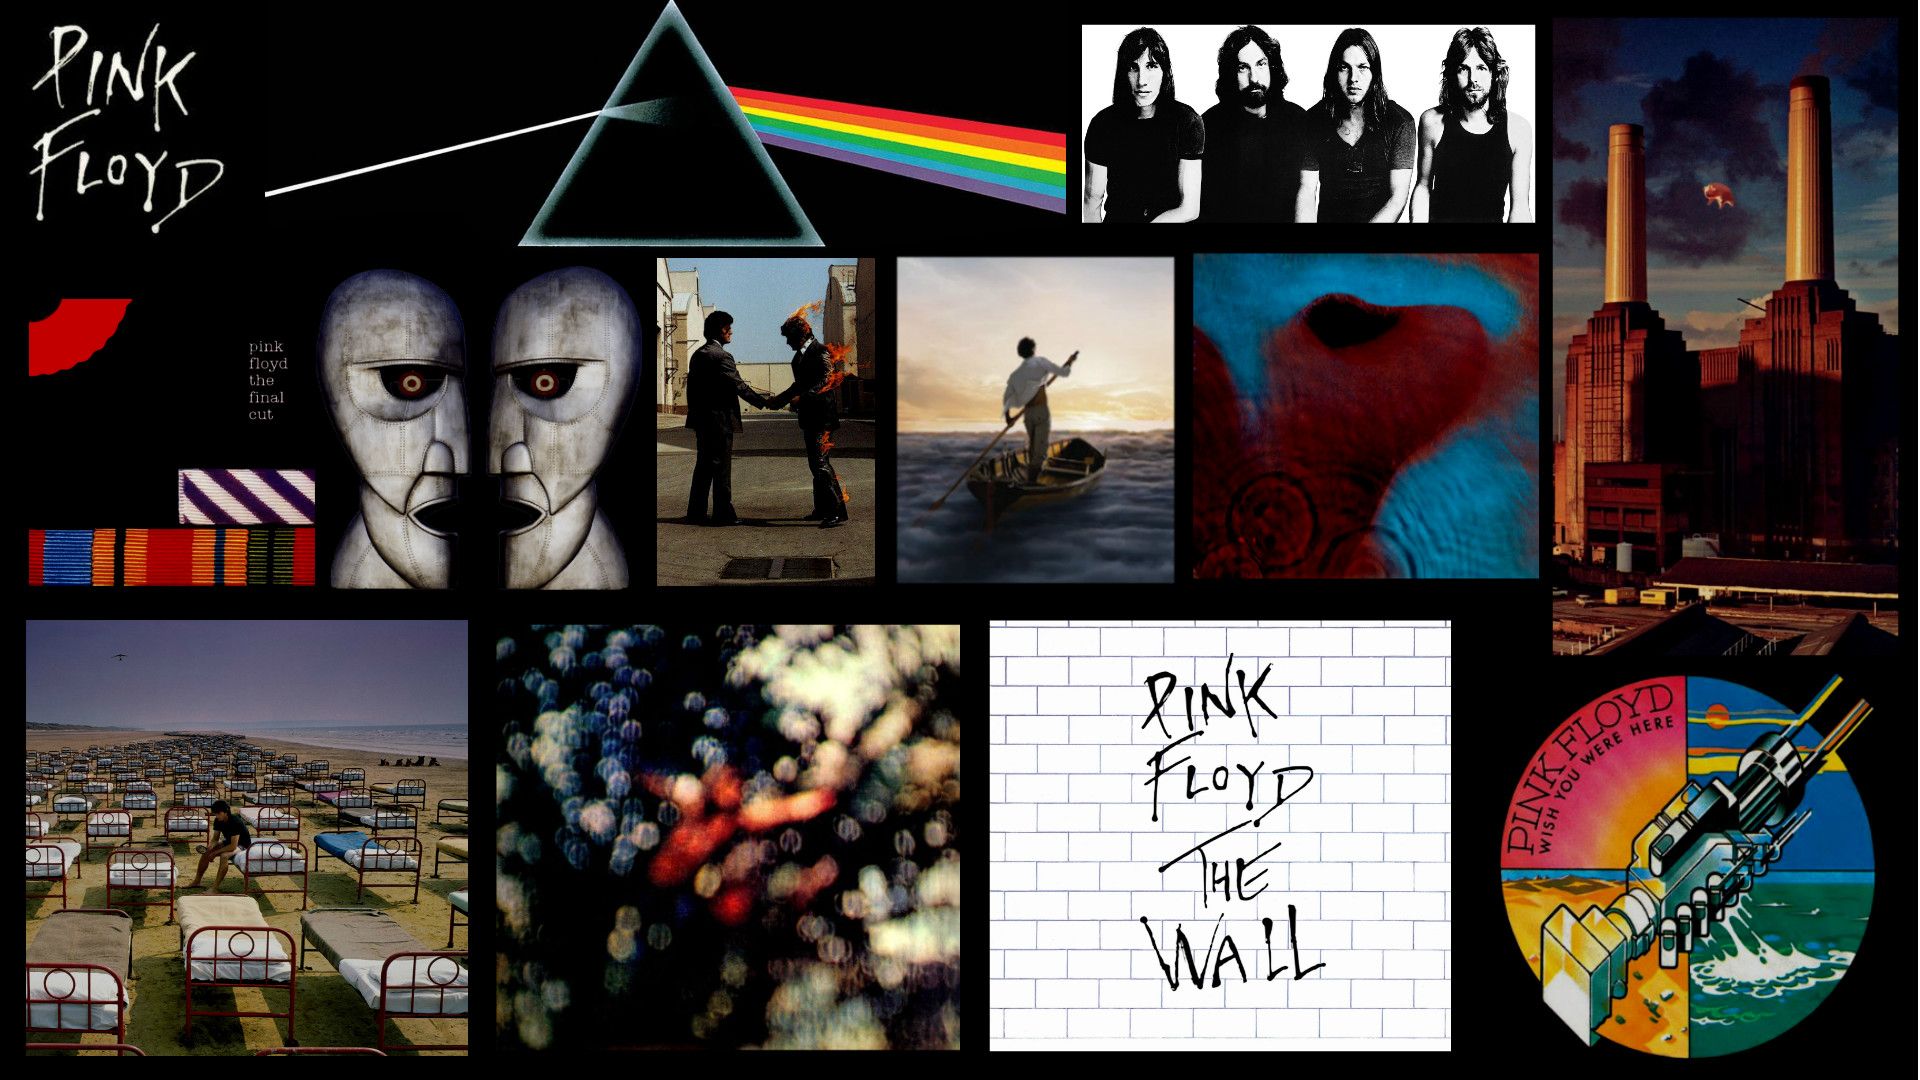 100+] Pink Floyd The Wall Wallpapers | Wallpapers.com